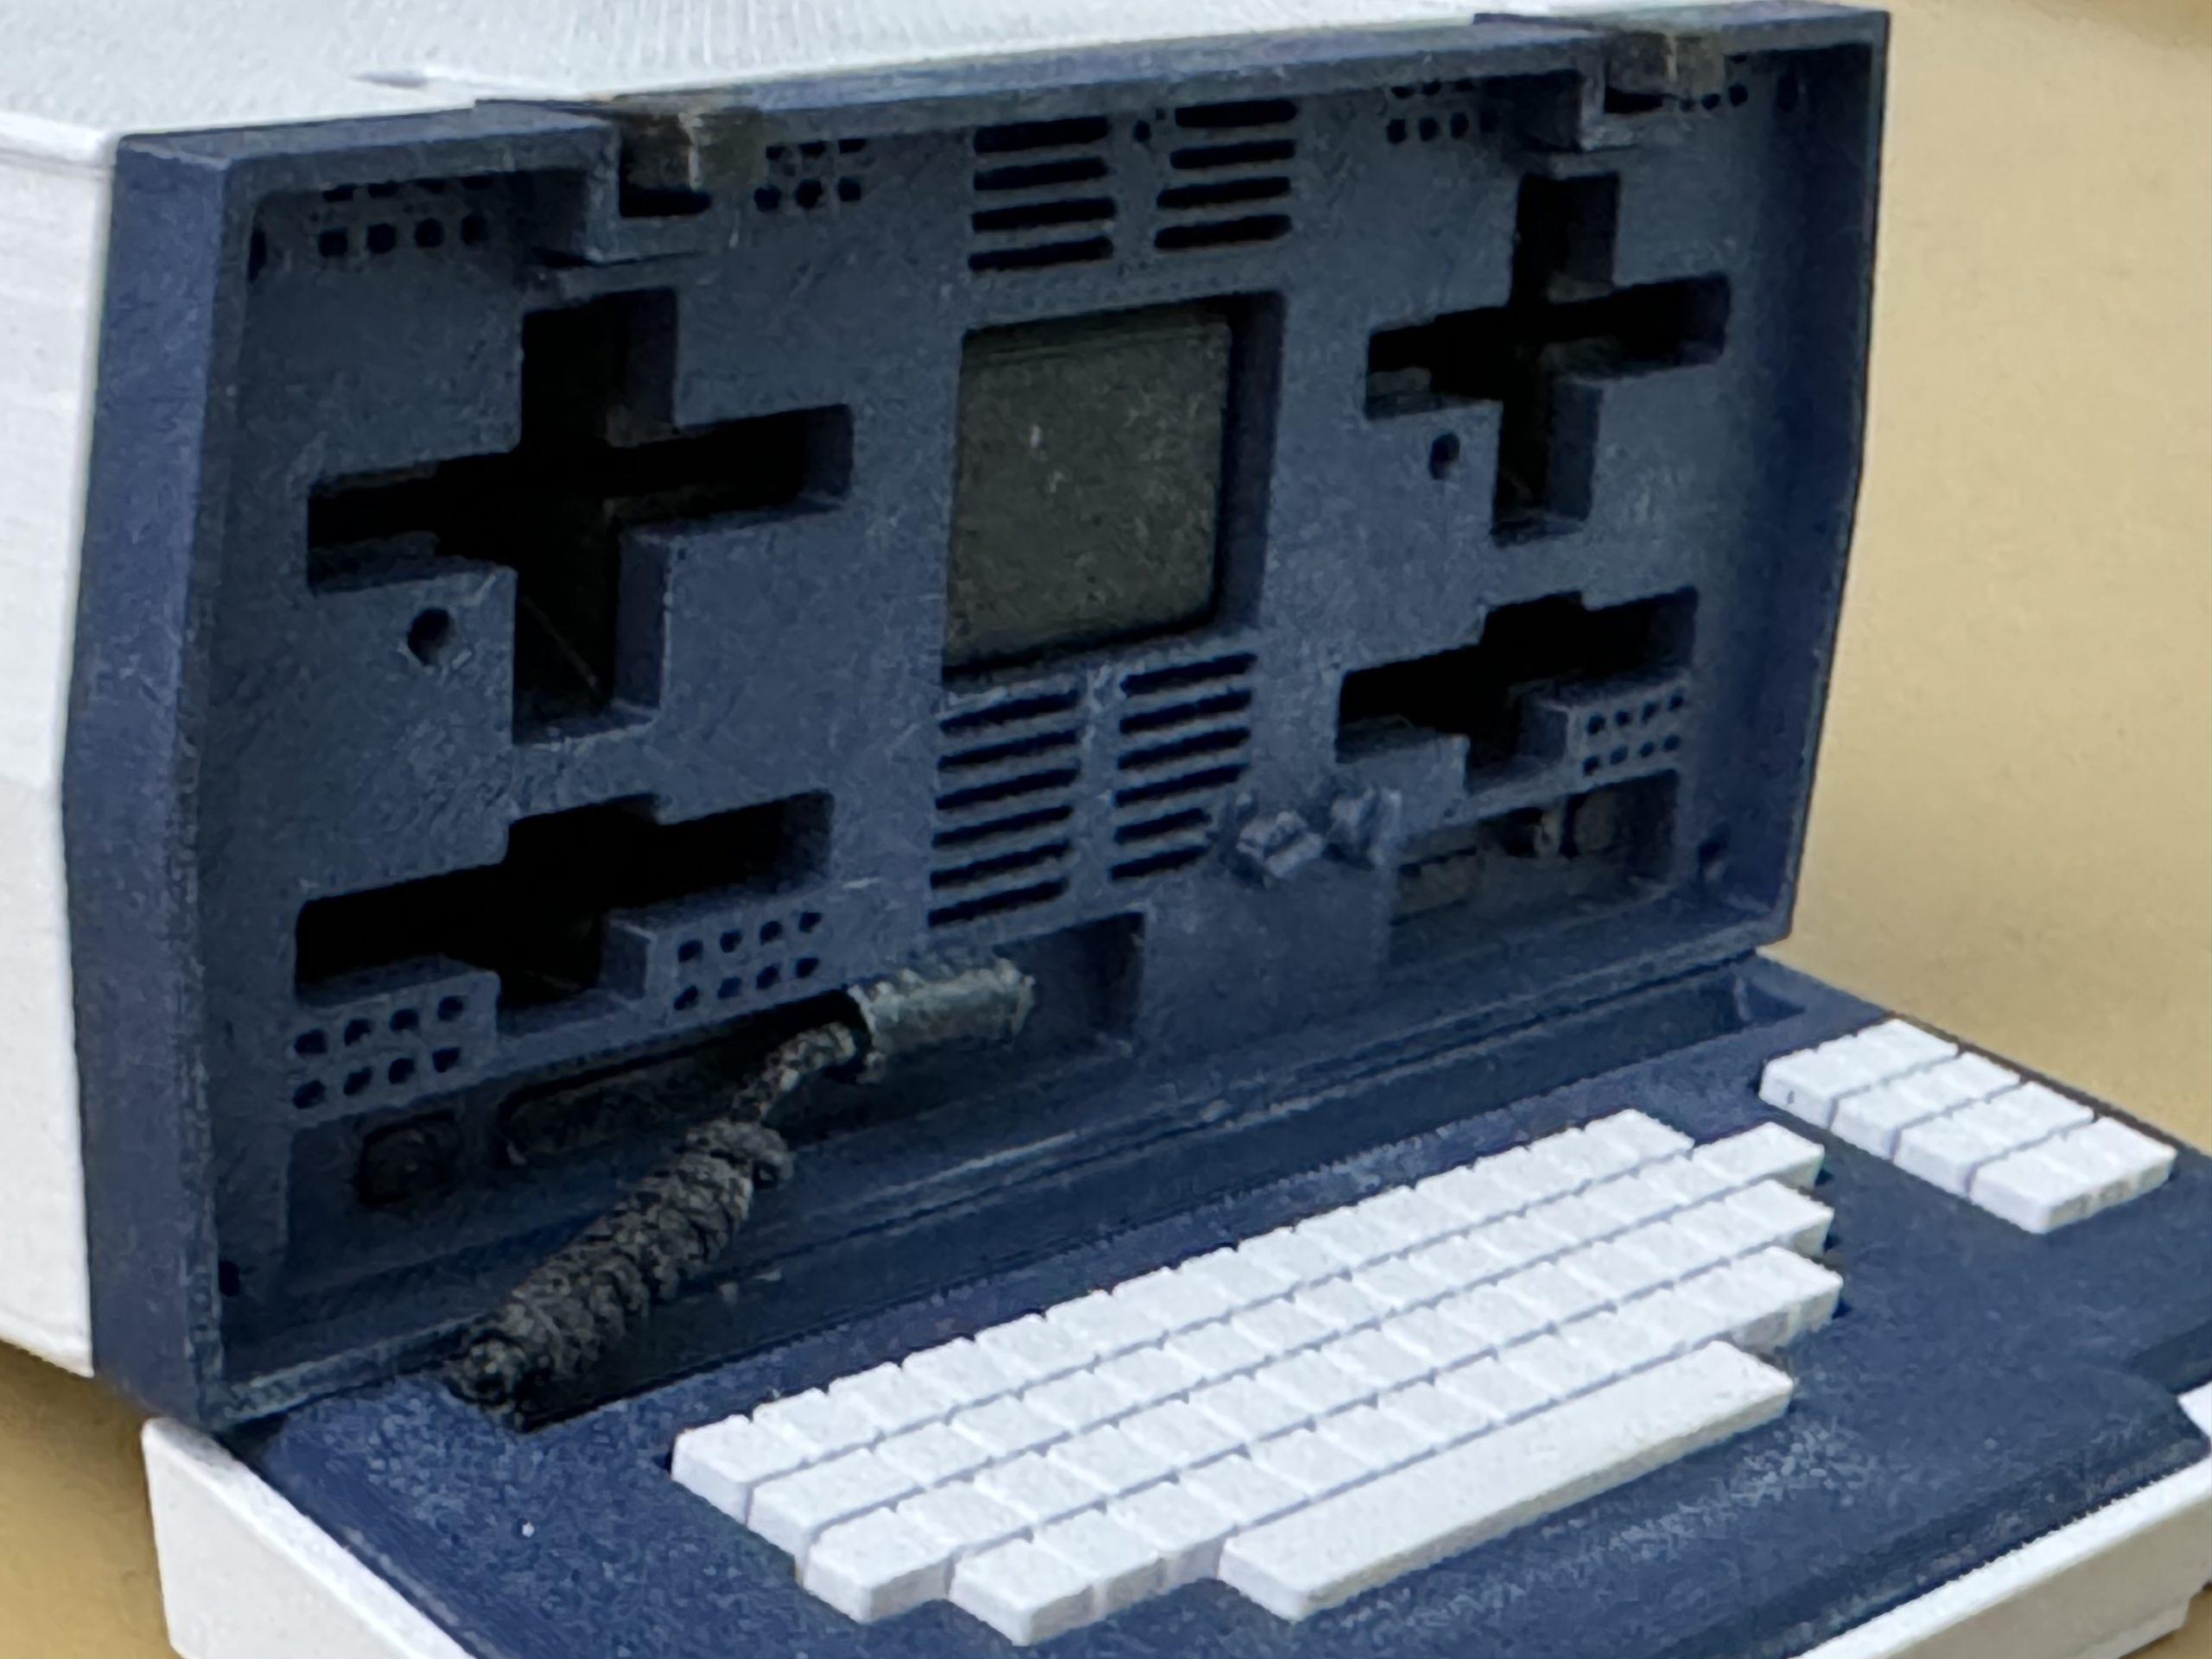 The front of the Osborne, showing the floppy drives, disk storage slots, screen, and keyboard connected to the case with a curly cable.